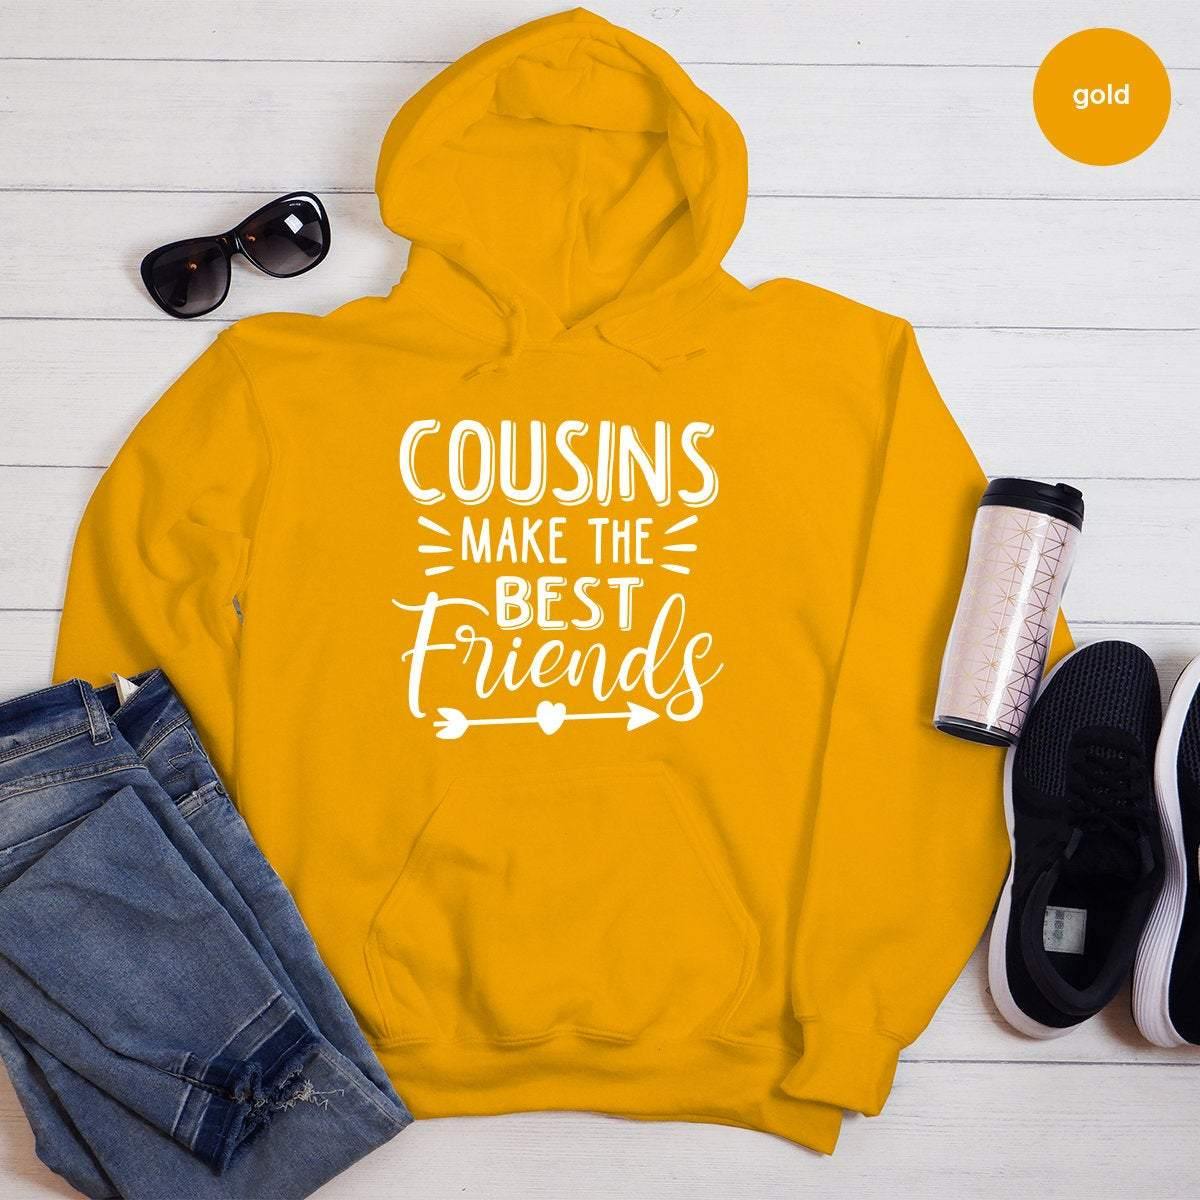 Crazy Cousin Crew Hoodie, Cousin Hoodie, Cousin Squad Hoodie, Gift For Cousin, Family Hoodies, Christmas Cousin Gift, Matching Family Hoodie - Fastdeliverytees.com